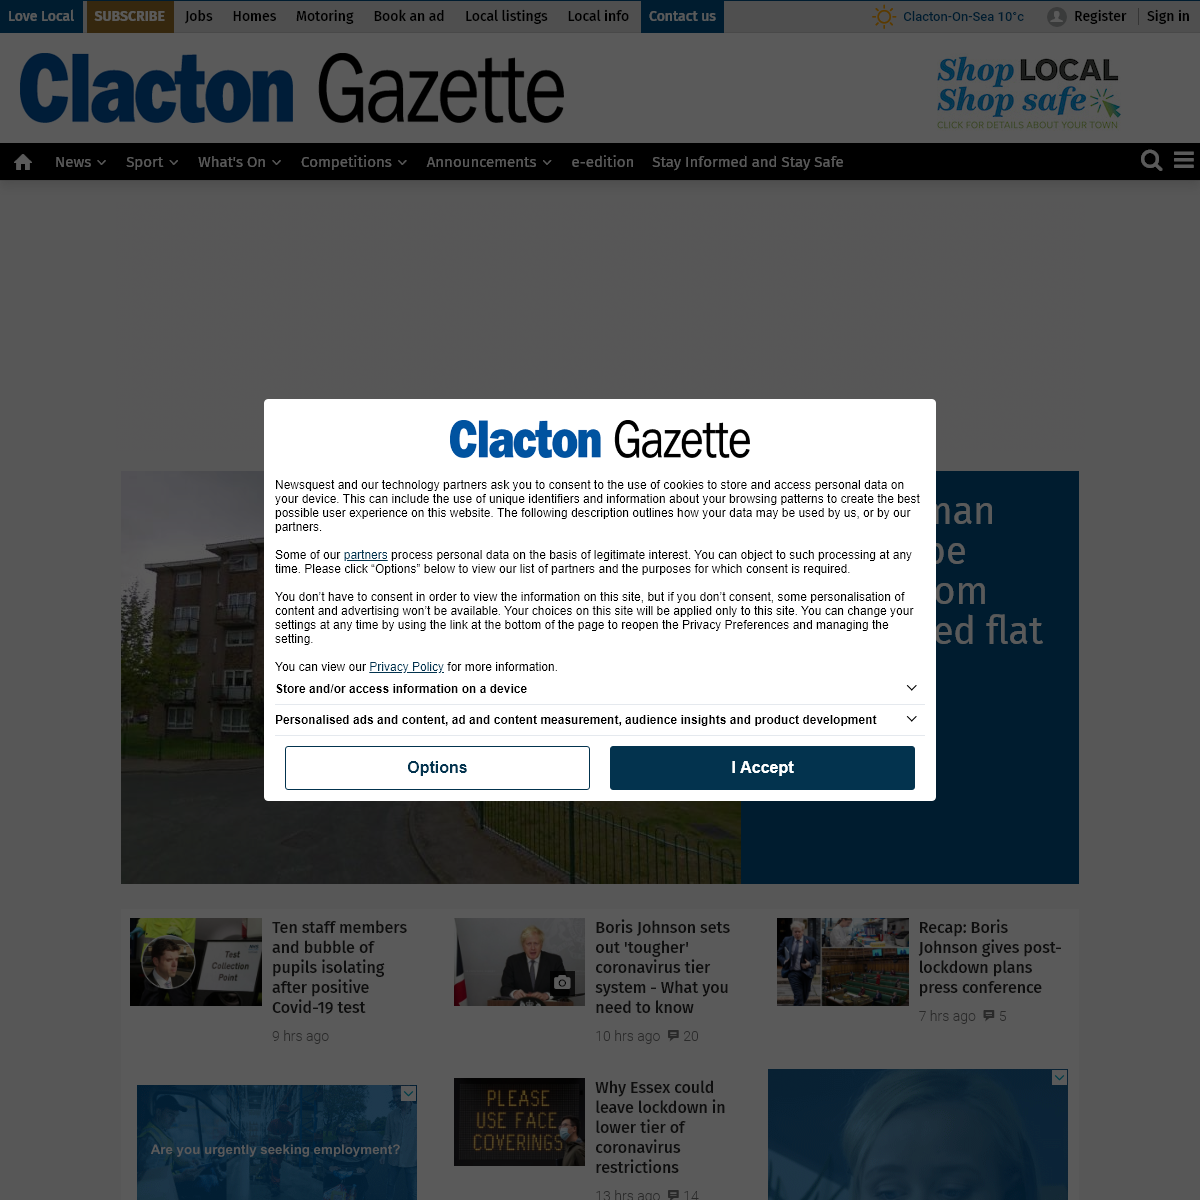 News and Sport for Clacton & Frinton, Leisure and local info from Clacton & Frinton Gazette